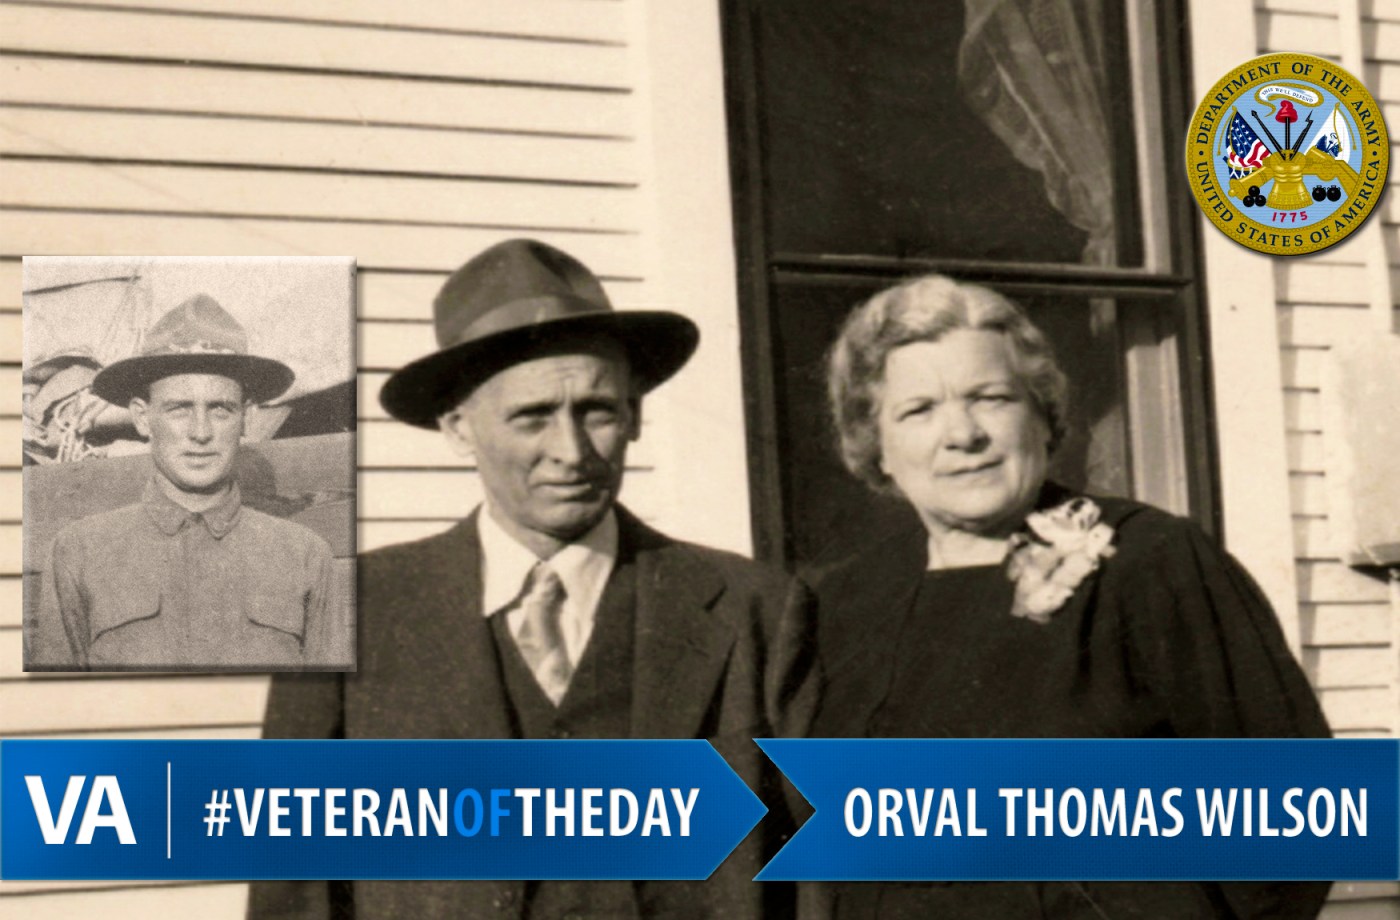 Orval Thomas Wilson - Veteran of the Day